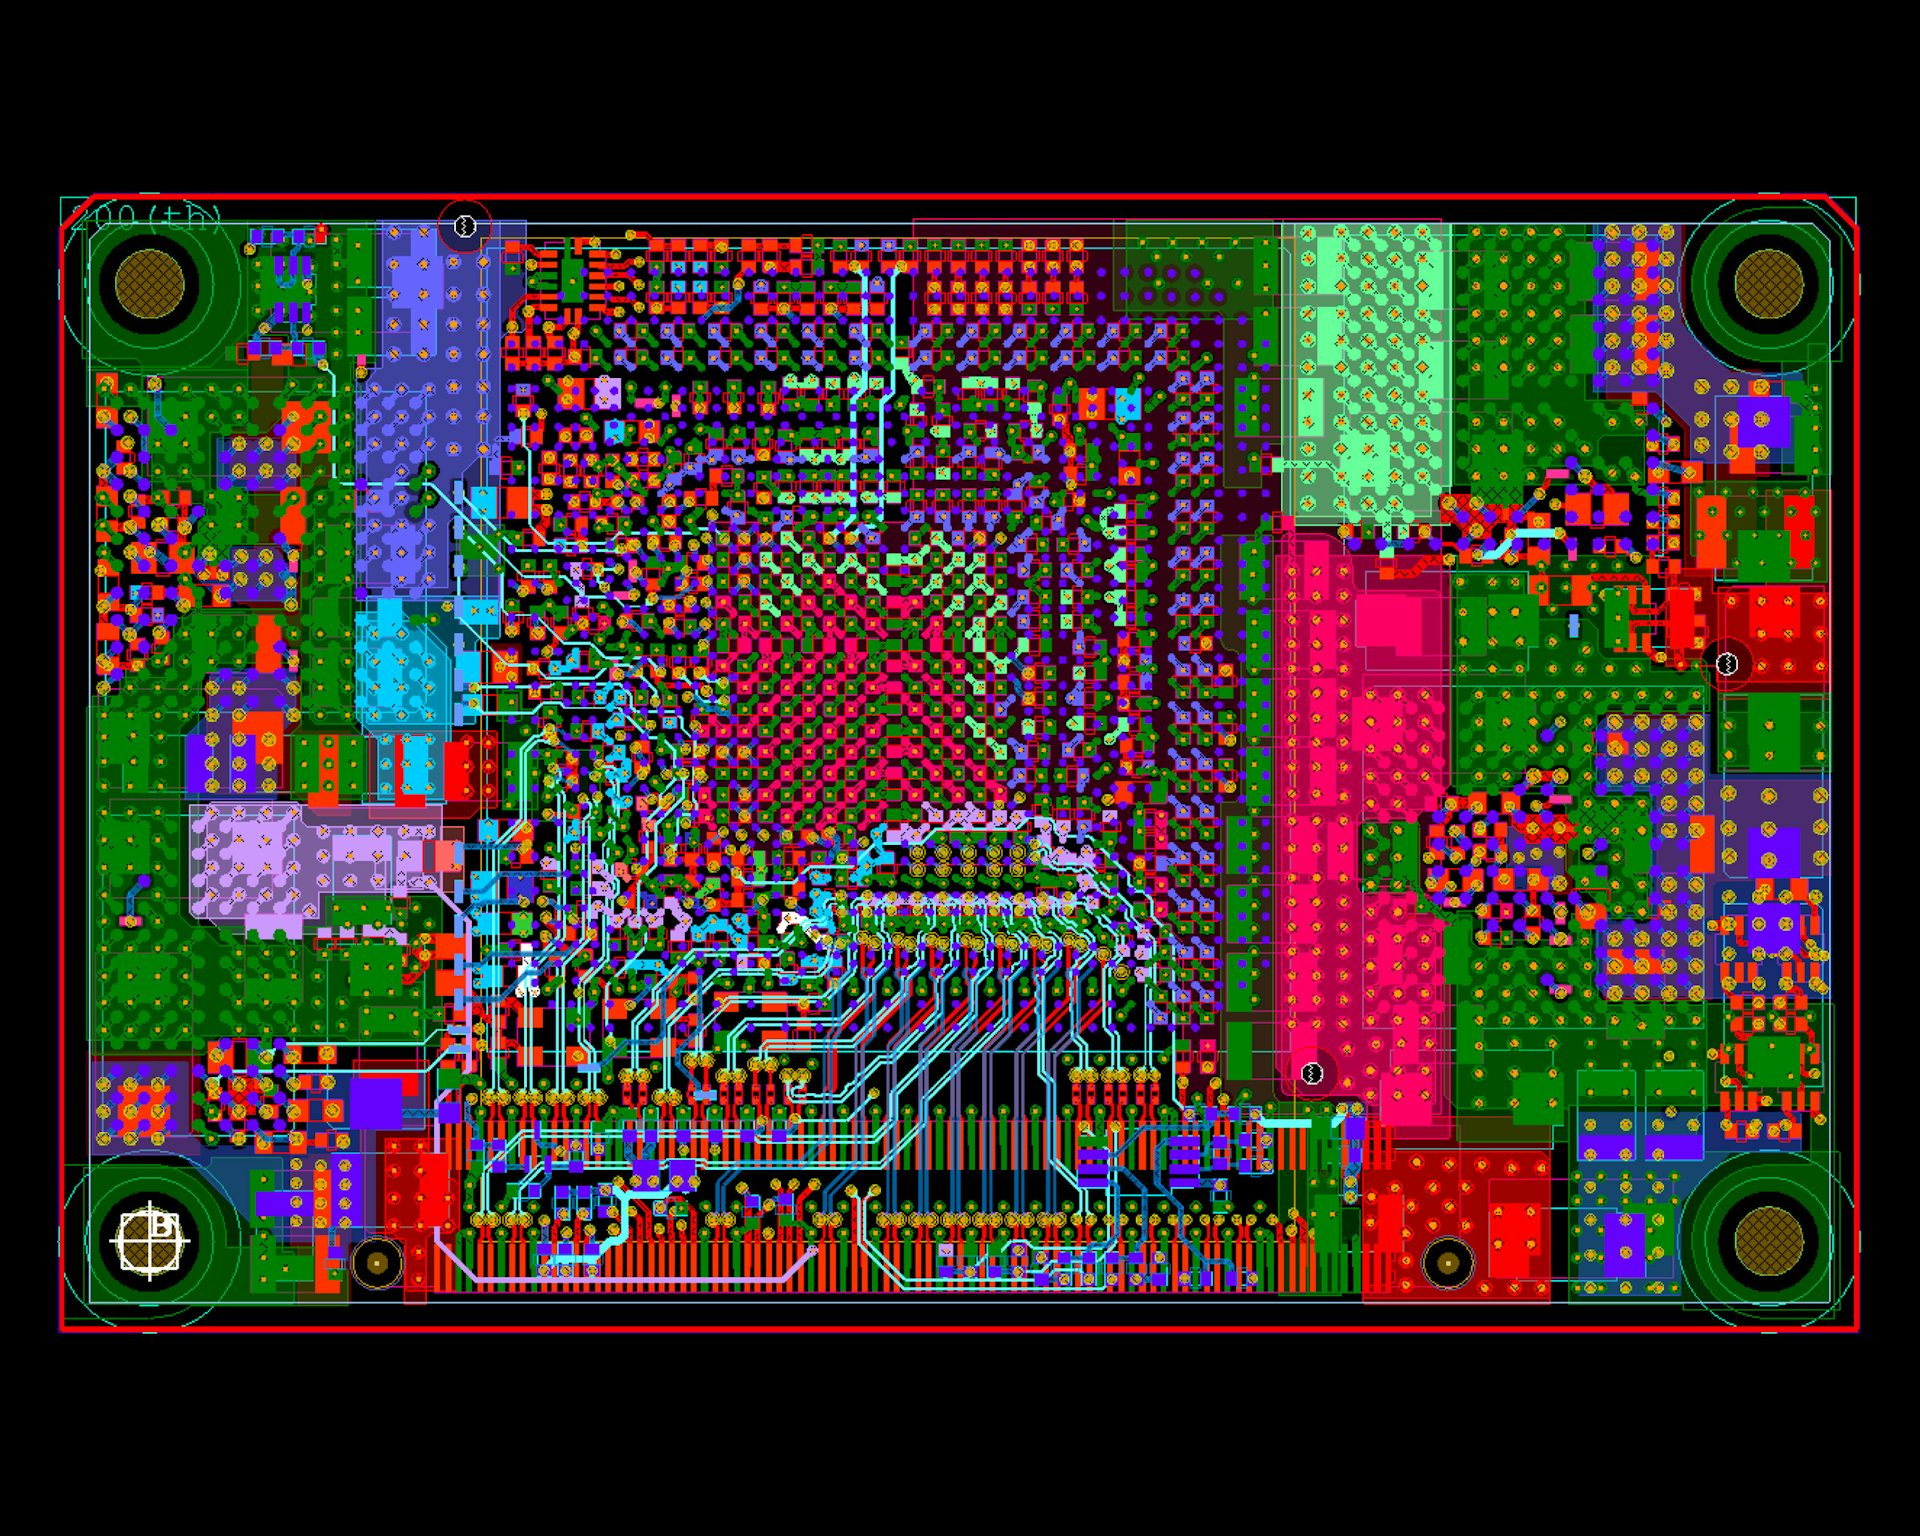 Press-Fit technology - Multi Circuit Boards